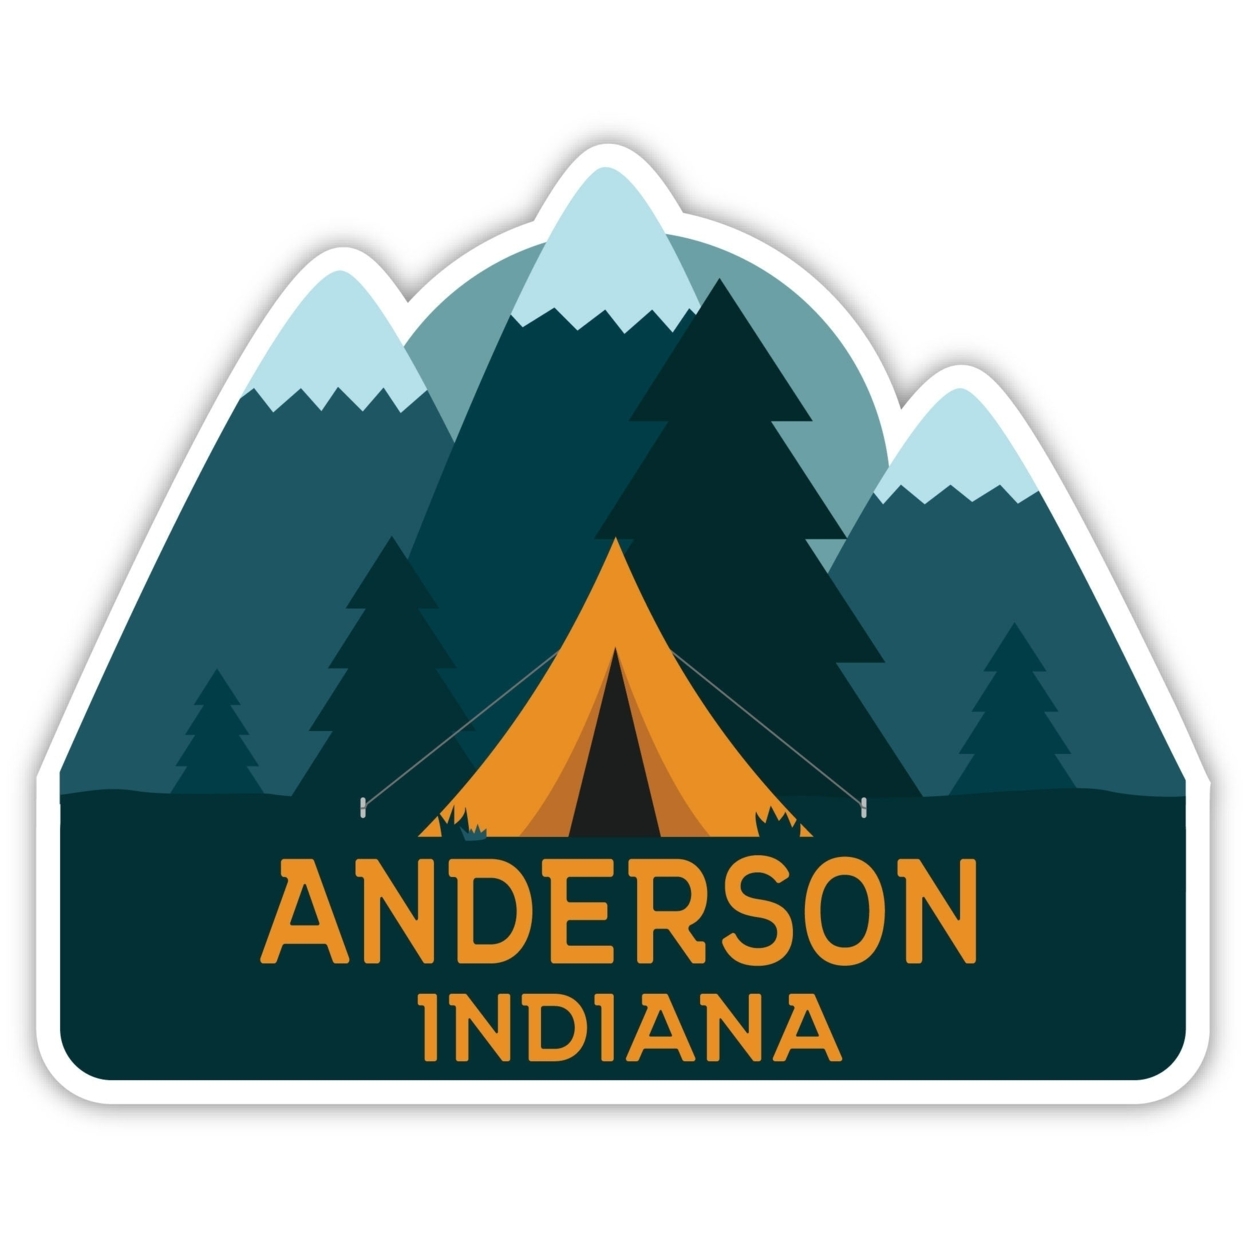 Anderson Indiana Souvenir Decorative Stickers (Choose Theme And Size) - Single Unit, 10-Inch, Tent